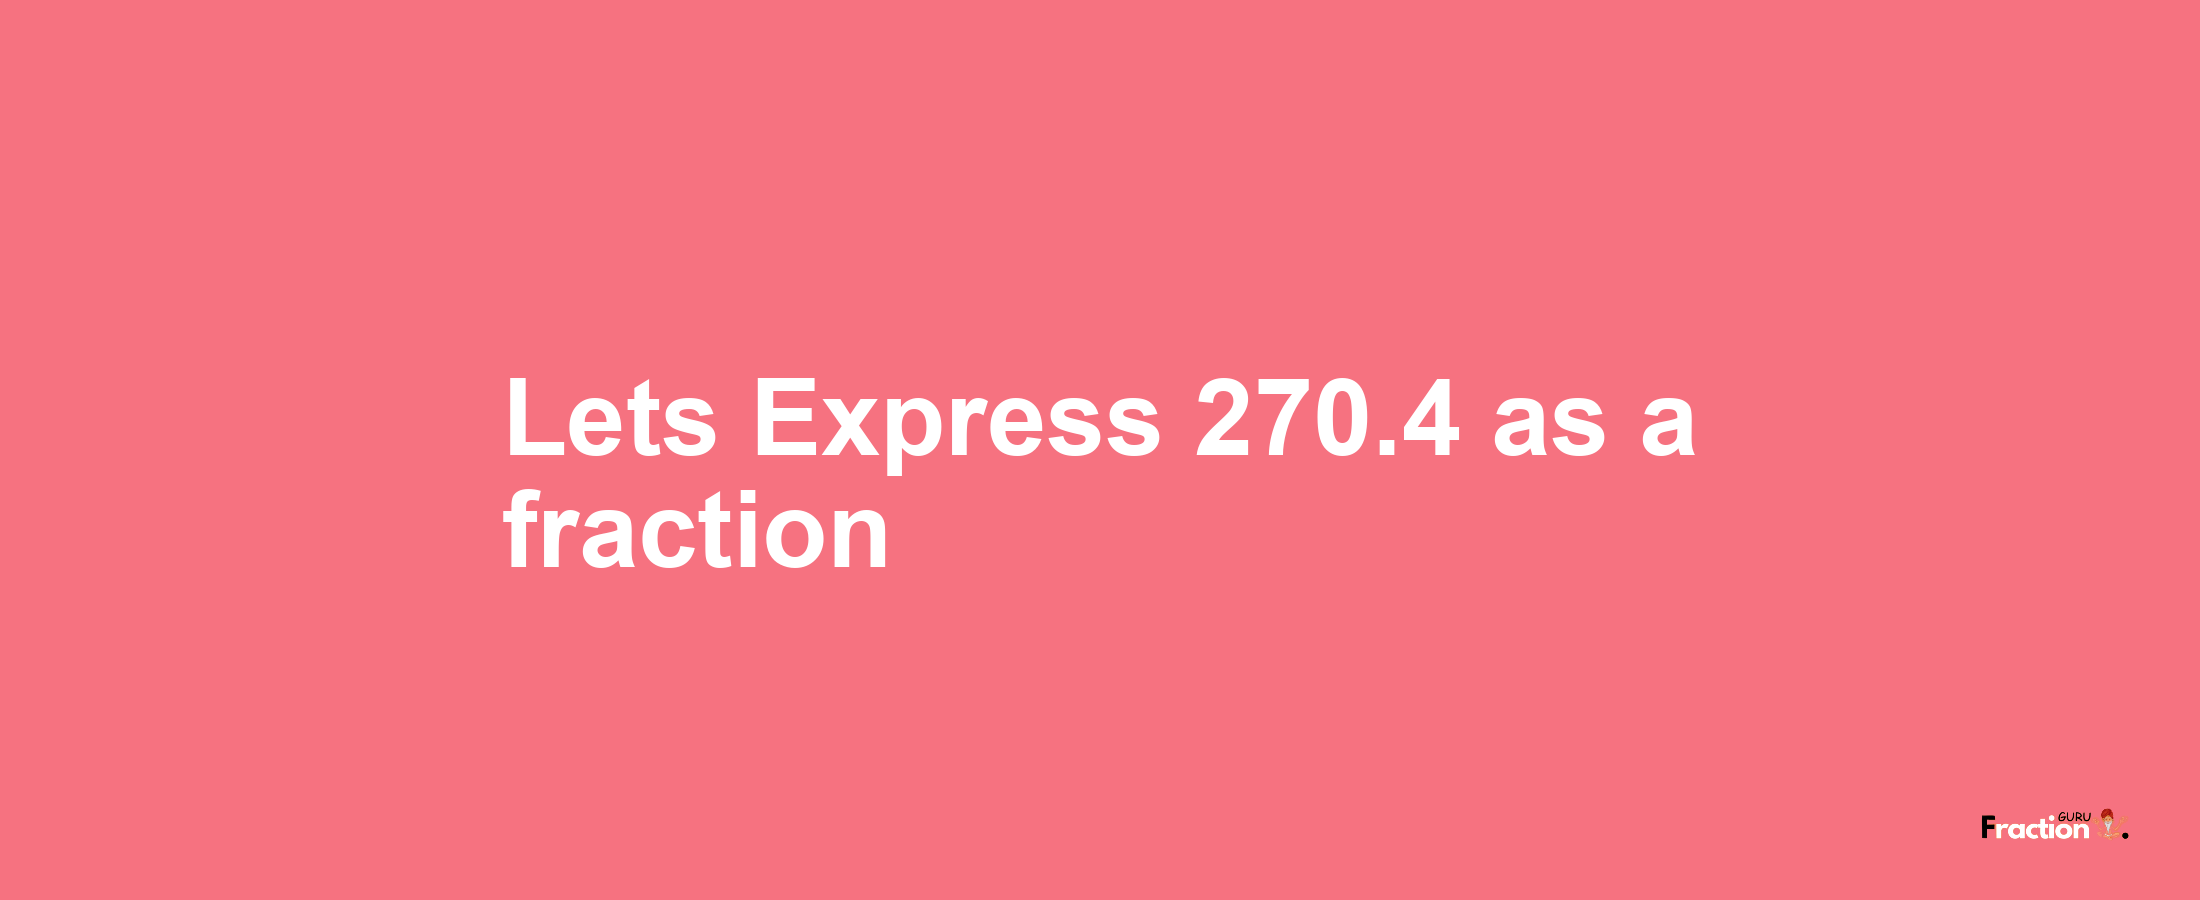 Lets Express 270.4 as afraction